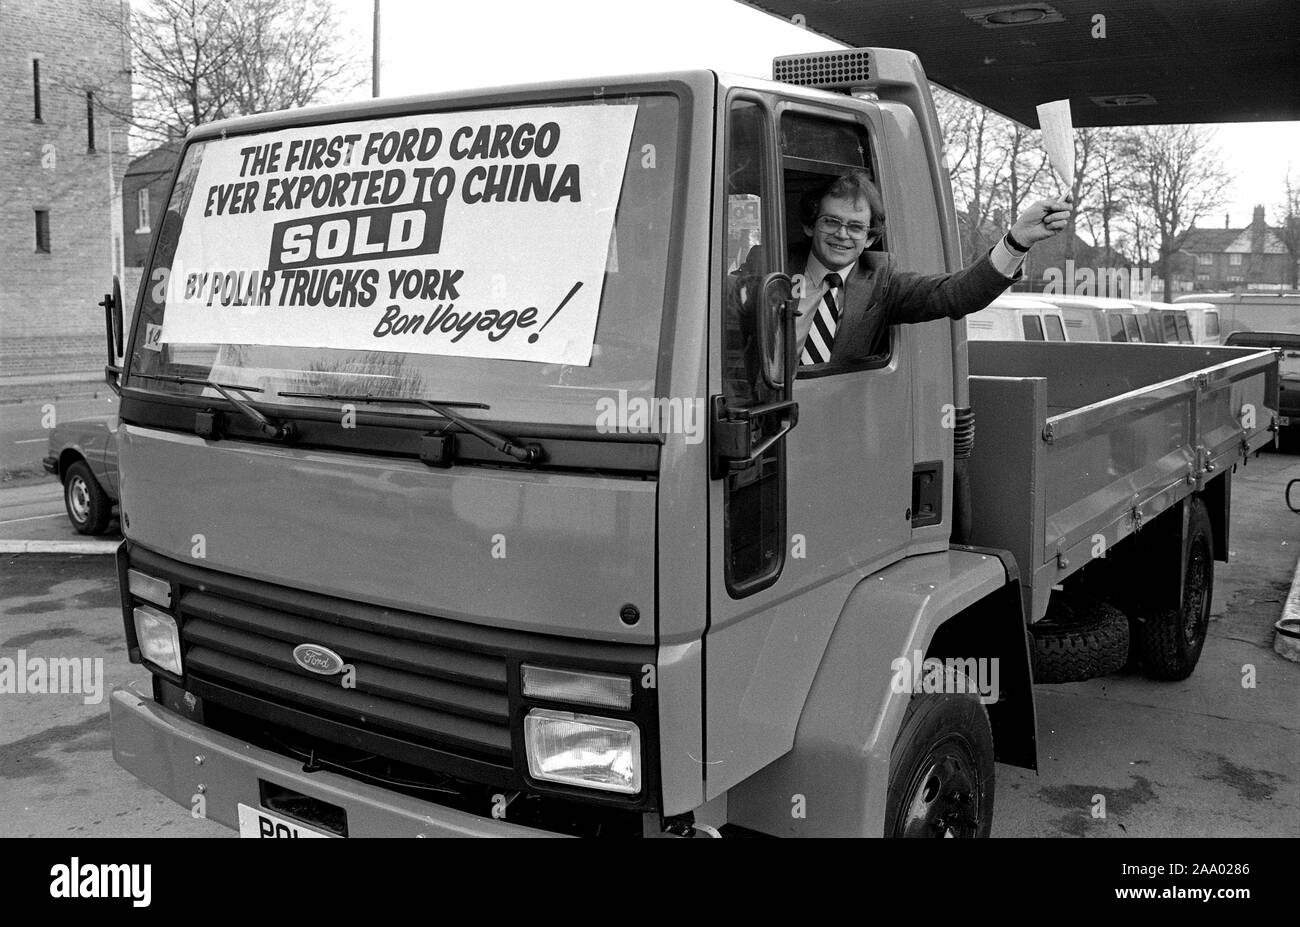 Ford Cargo truck being exported to China from Britain in 1985 Stock Photo